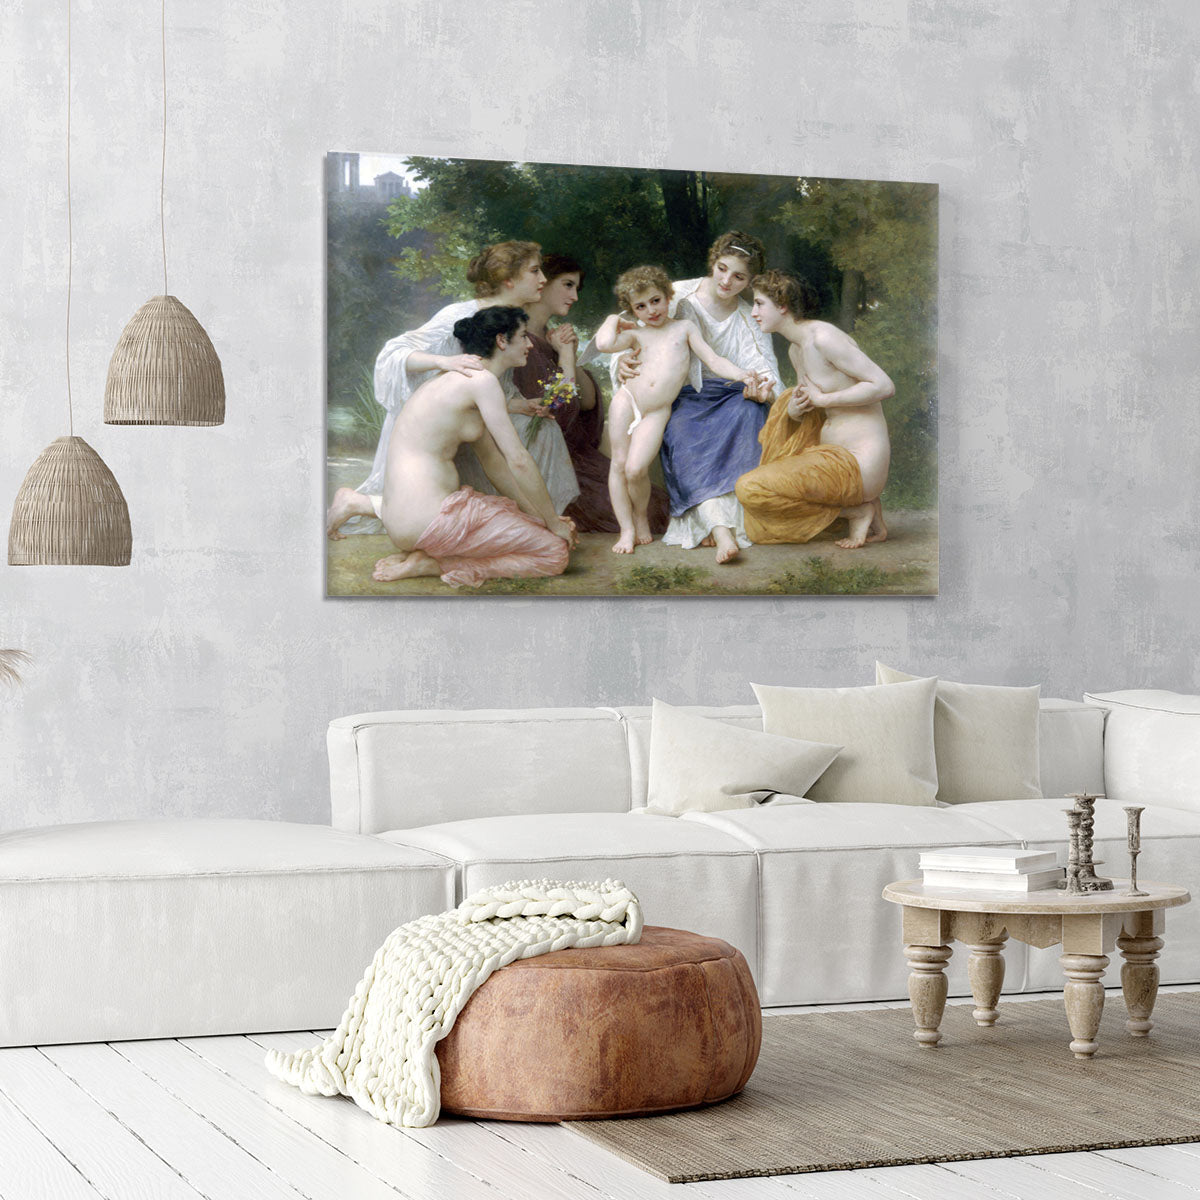 Admiration By Bouguereau Canvas Print or Poster - Canvas Art Rocks - 6